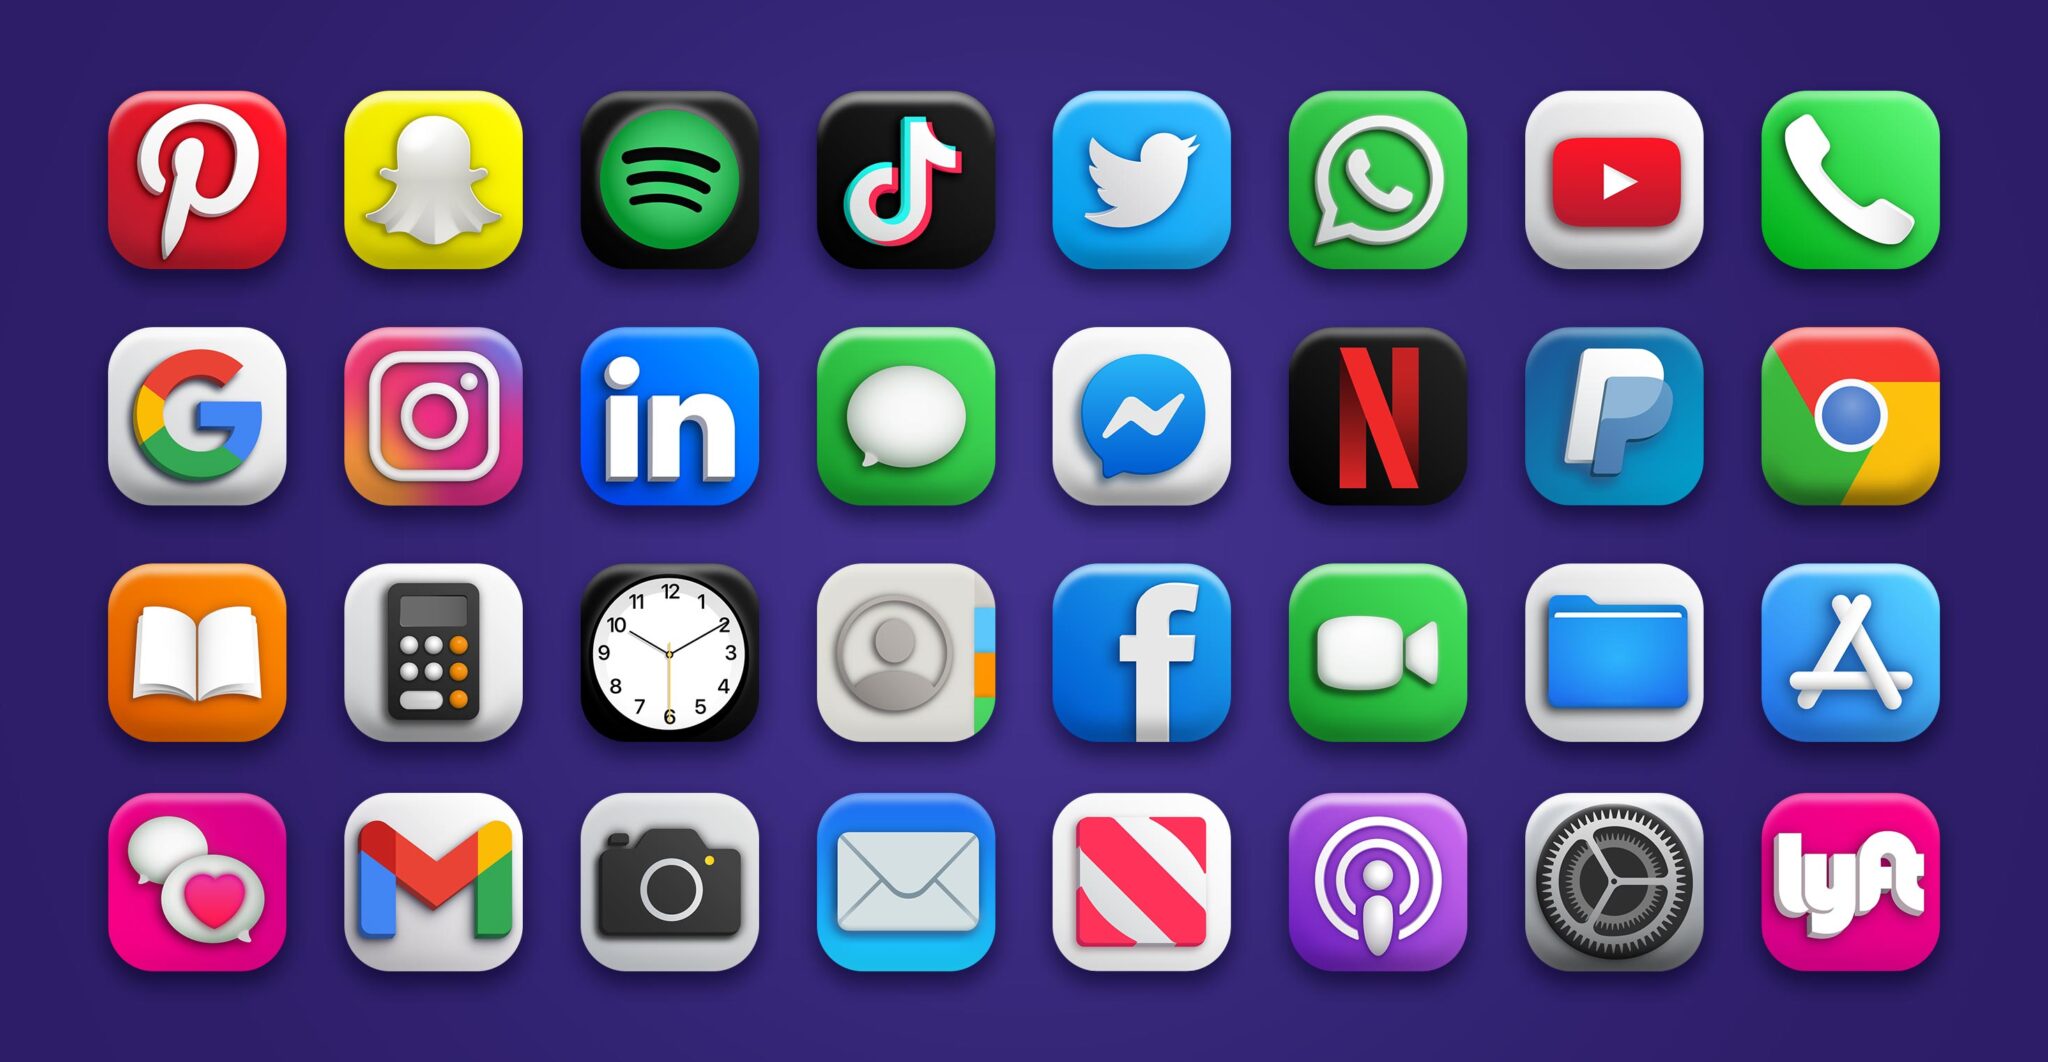 royalty free app icons